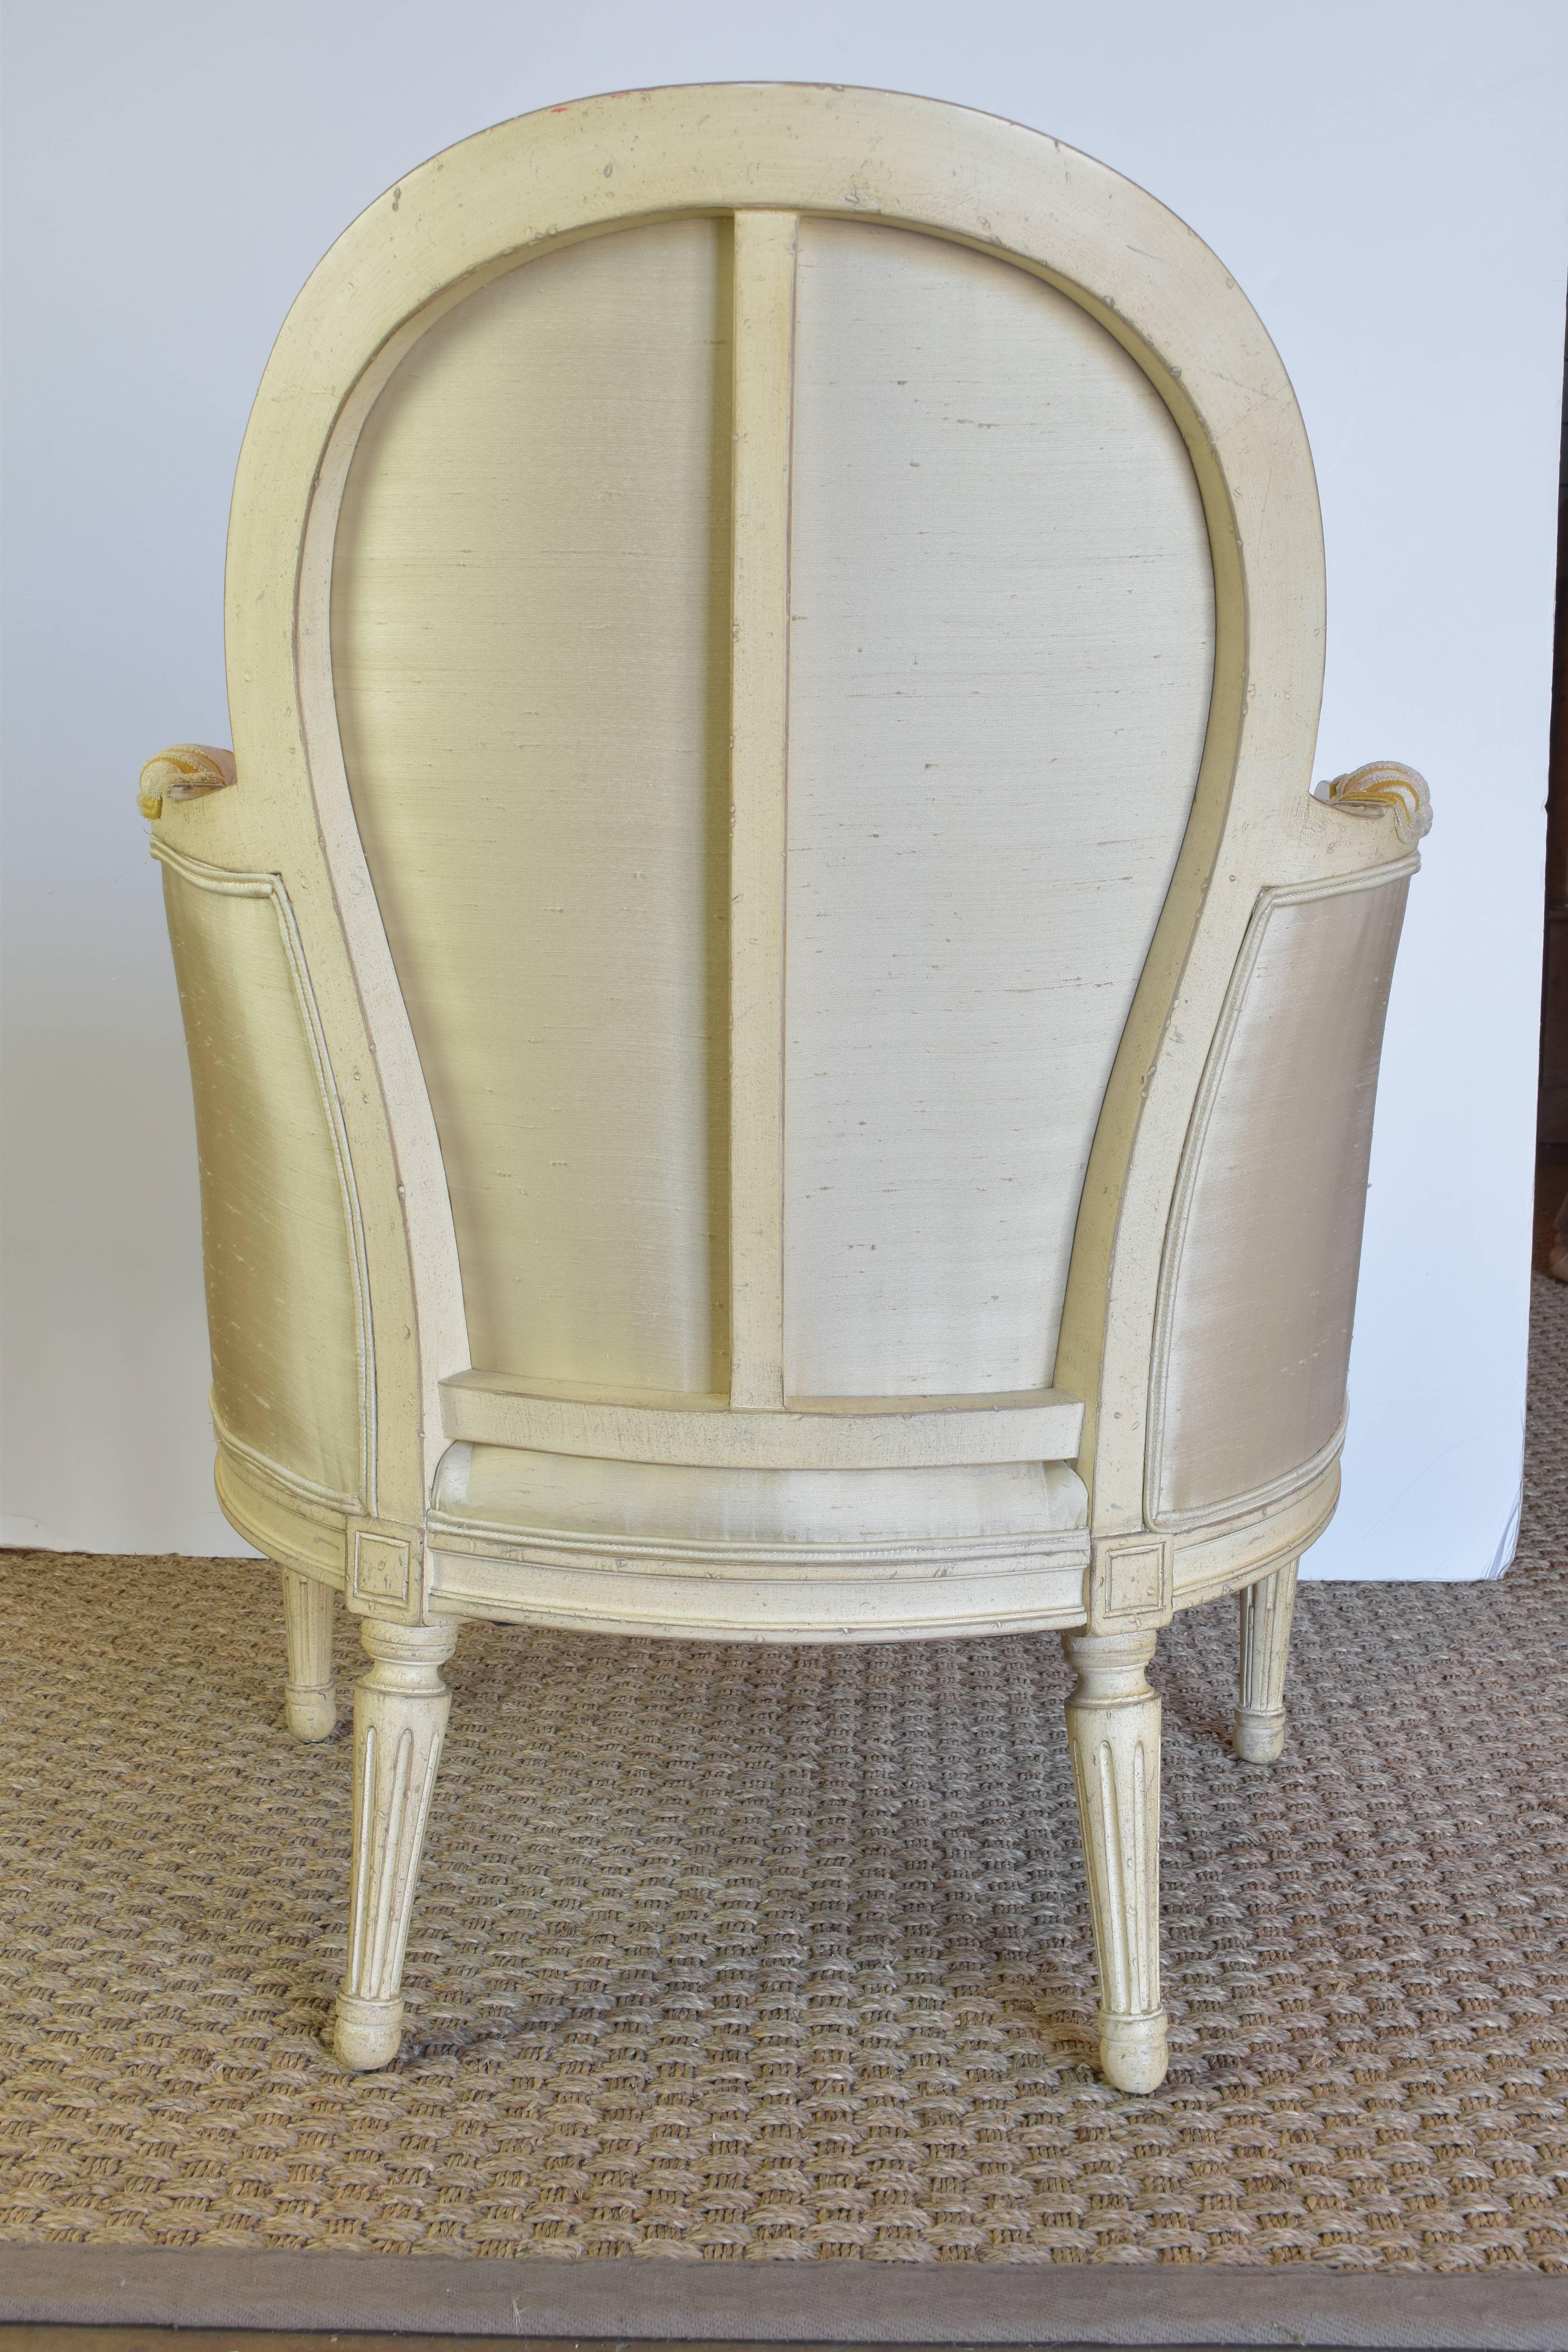 Vintage Baker French chair in the style of Louis XVI in an off-white original painted finish. Original yellow damask upholstery.